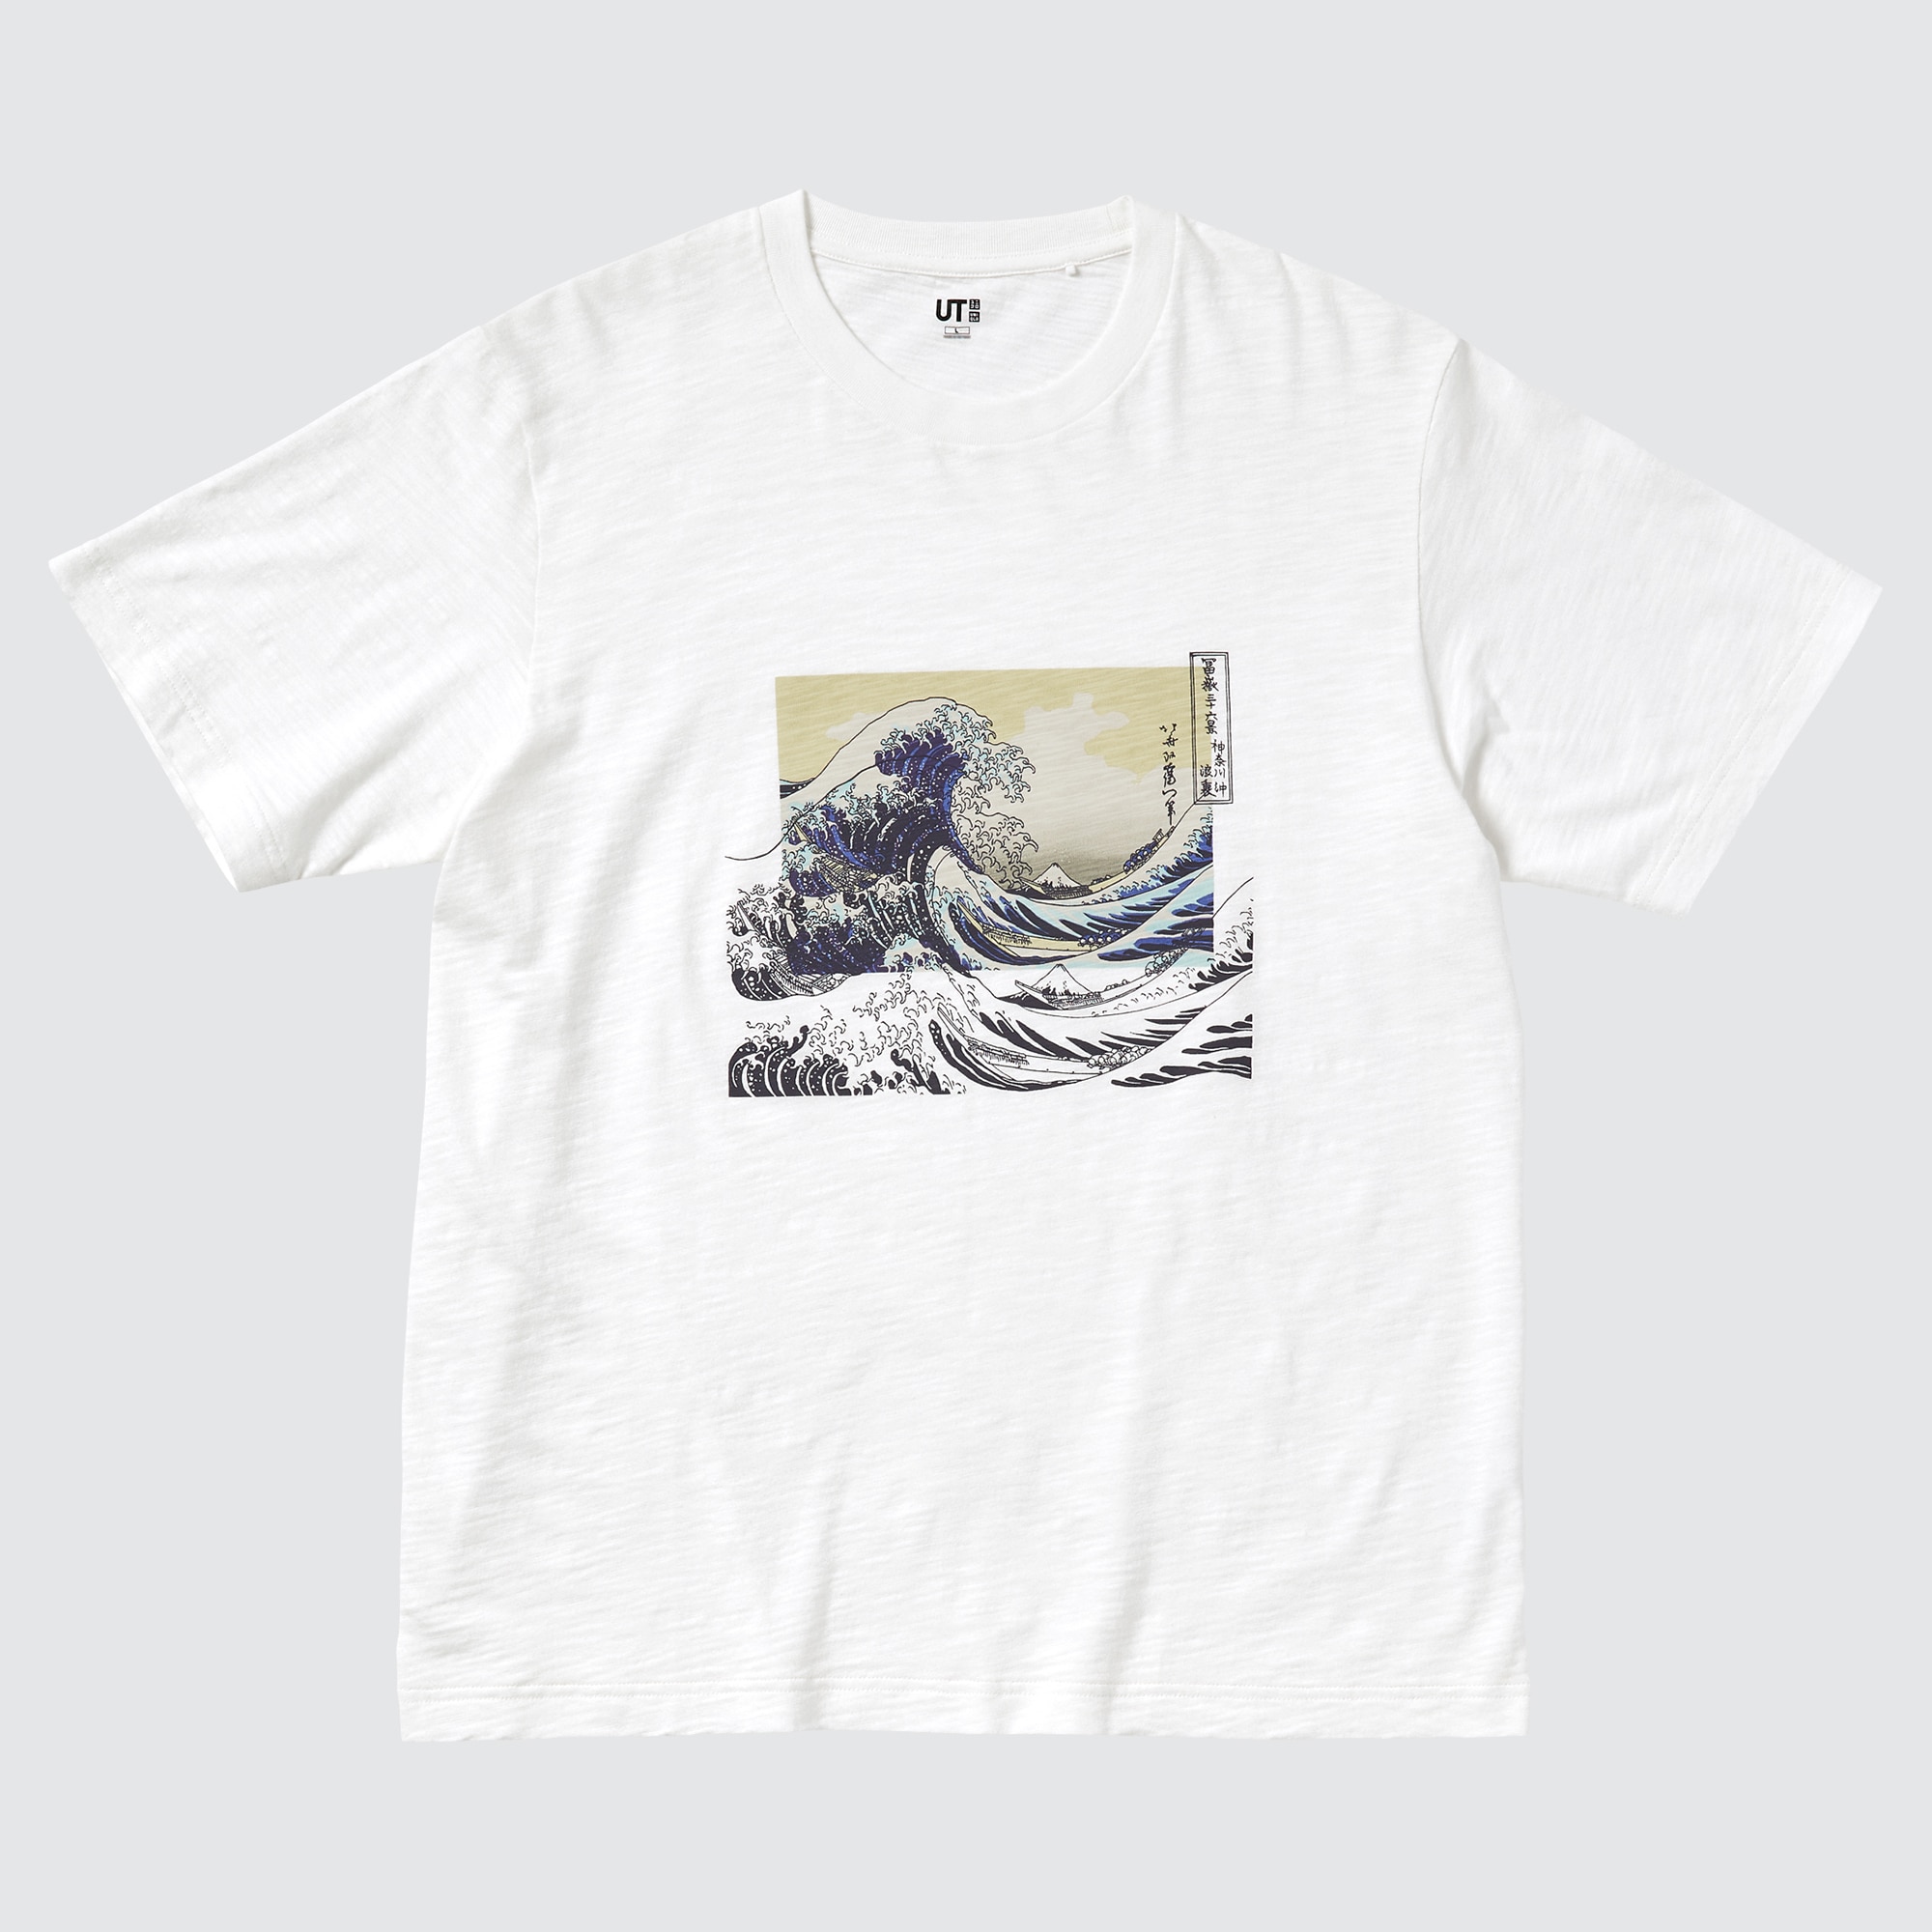 Ukiyo-e Masters UT collection, Graphic T-shirts and sweatshirts for adults